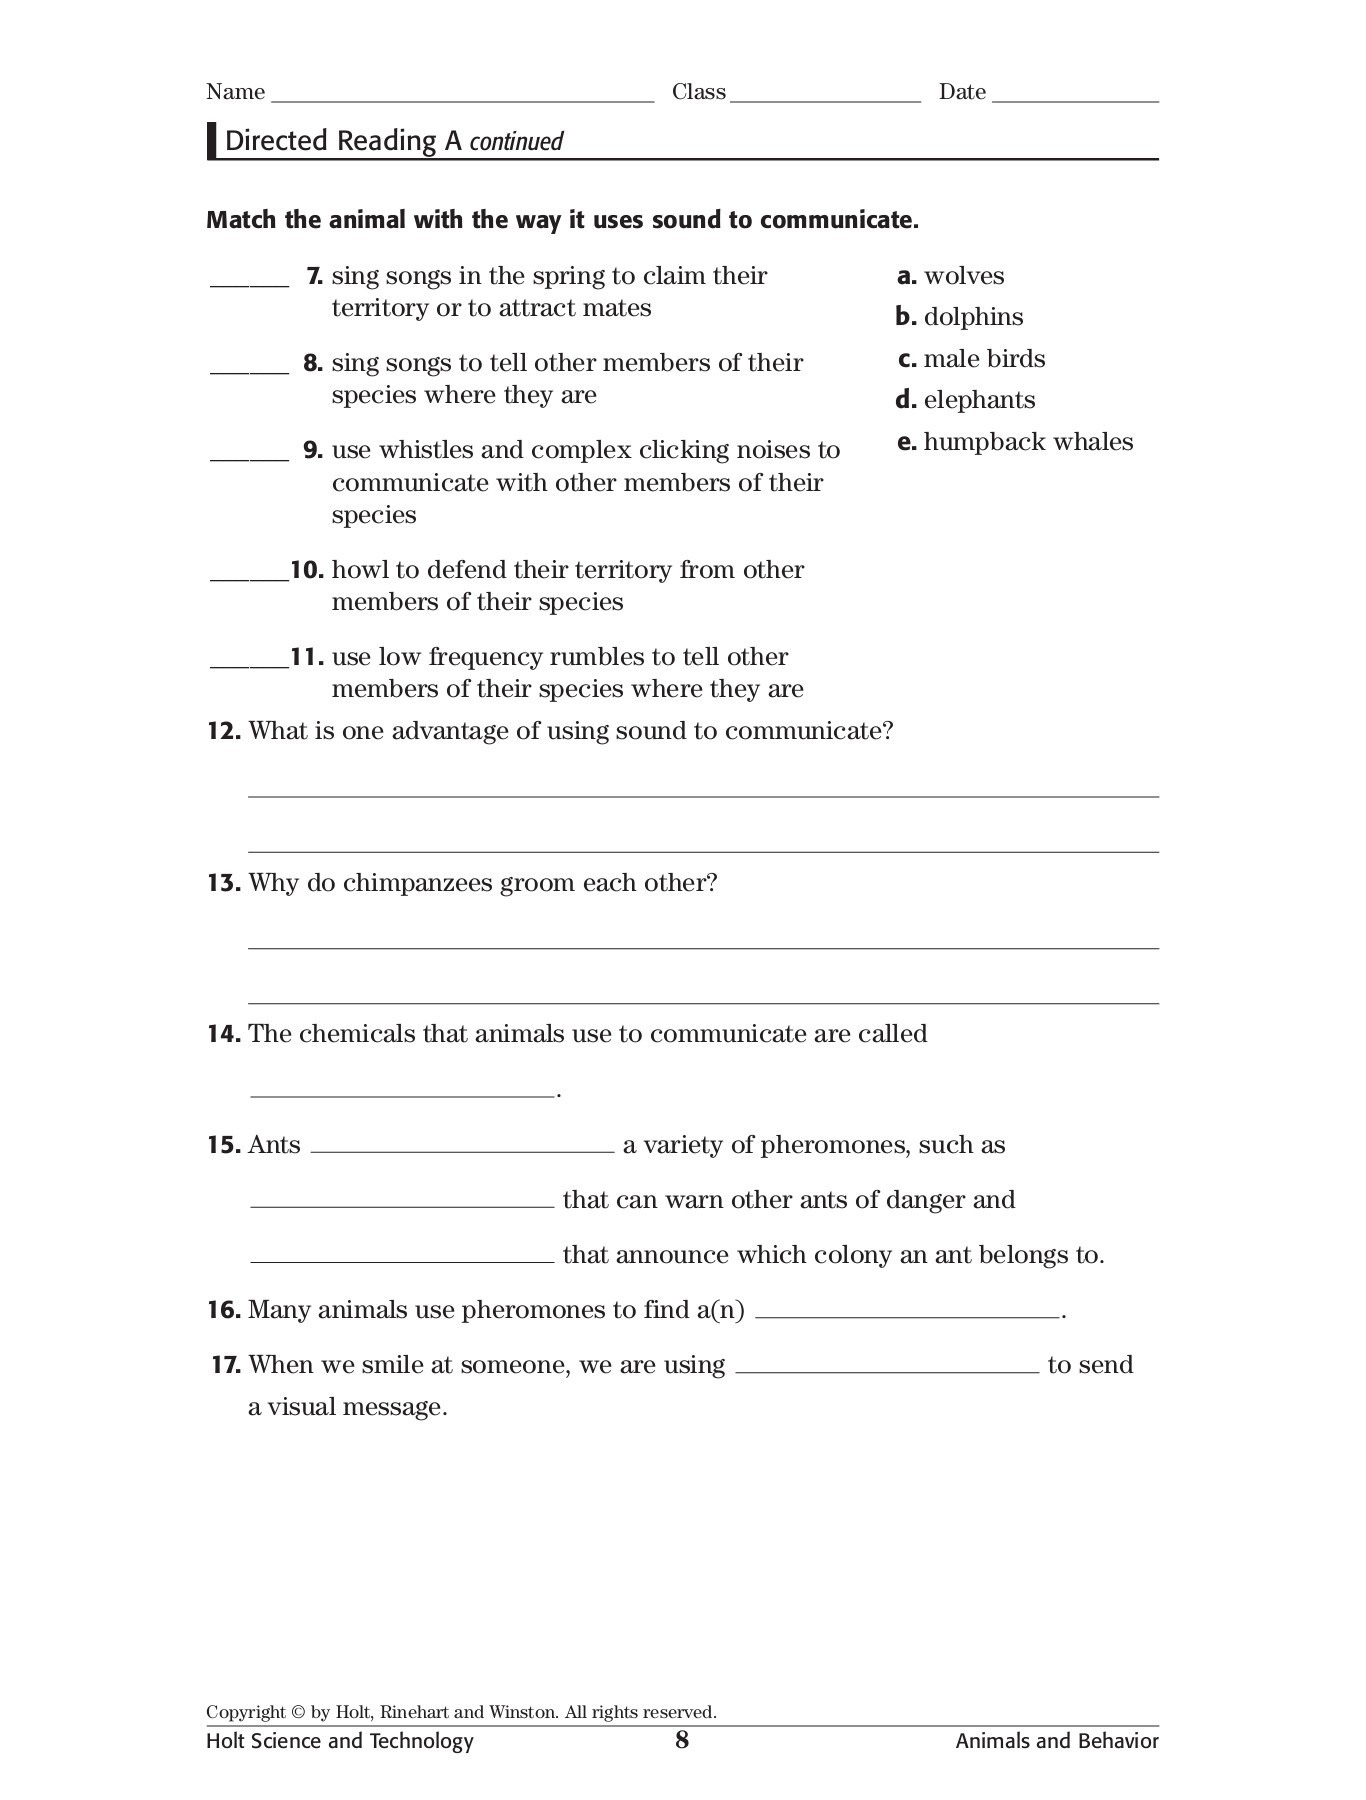 Skills Worksheet Directed Reading A  Pcmac Pages 1  3